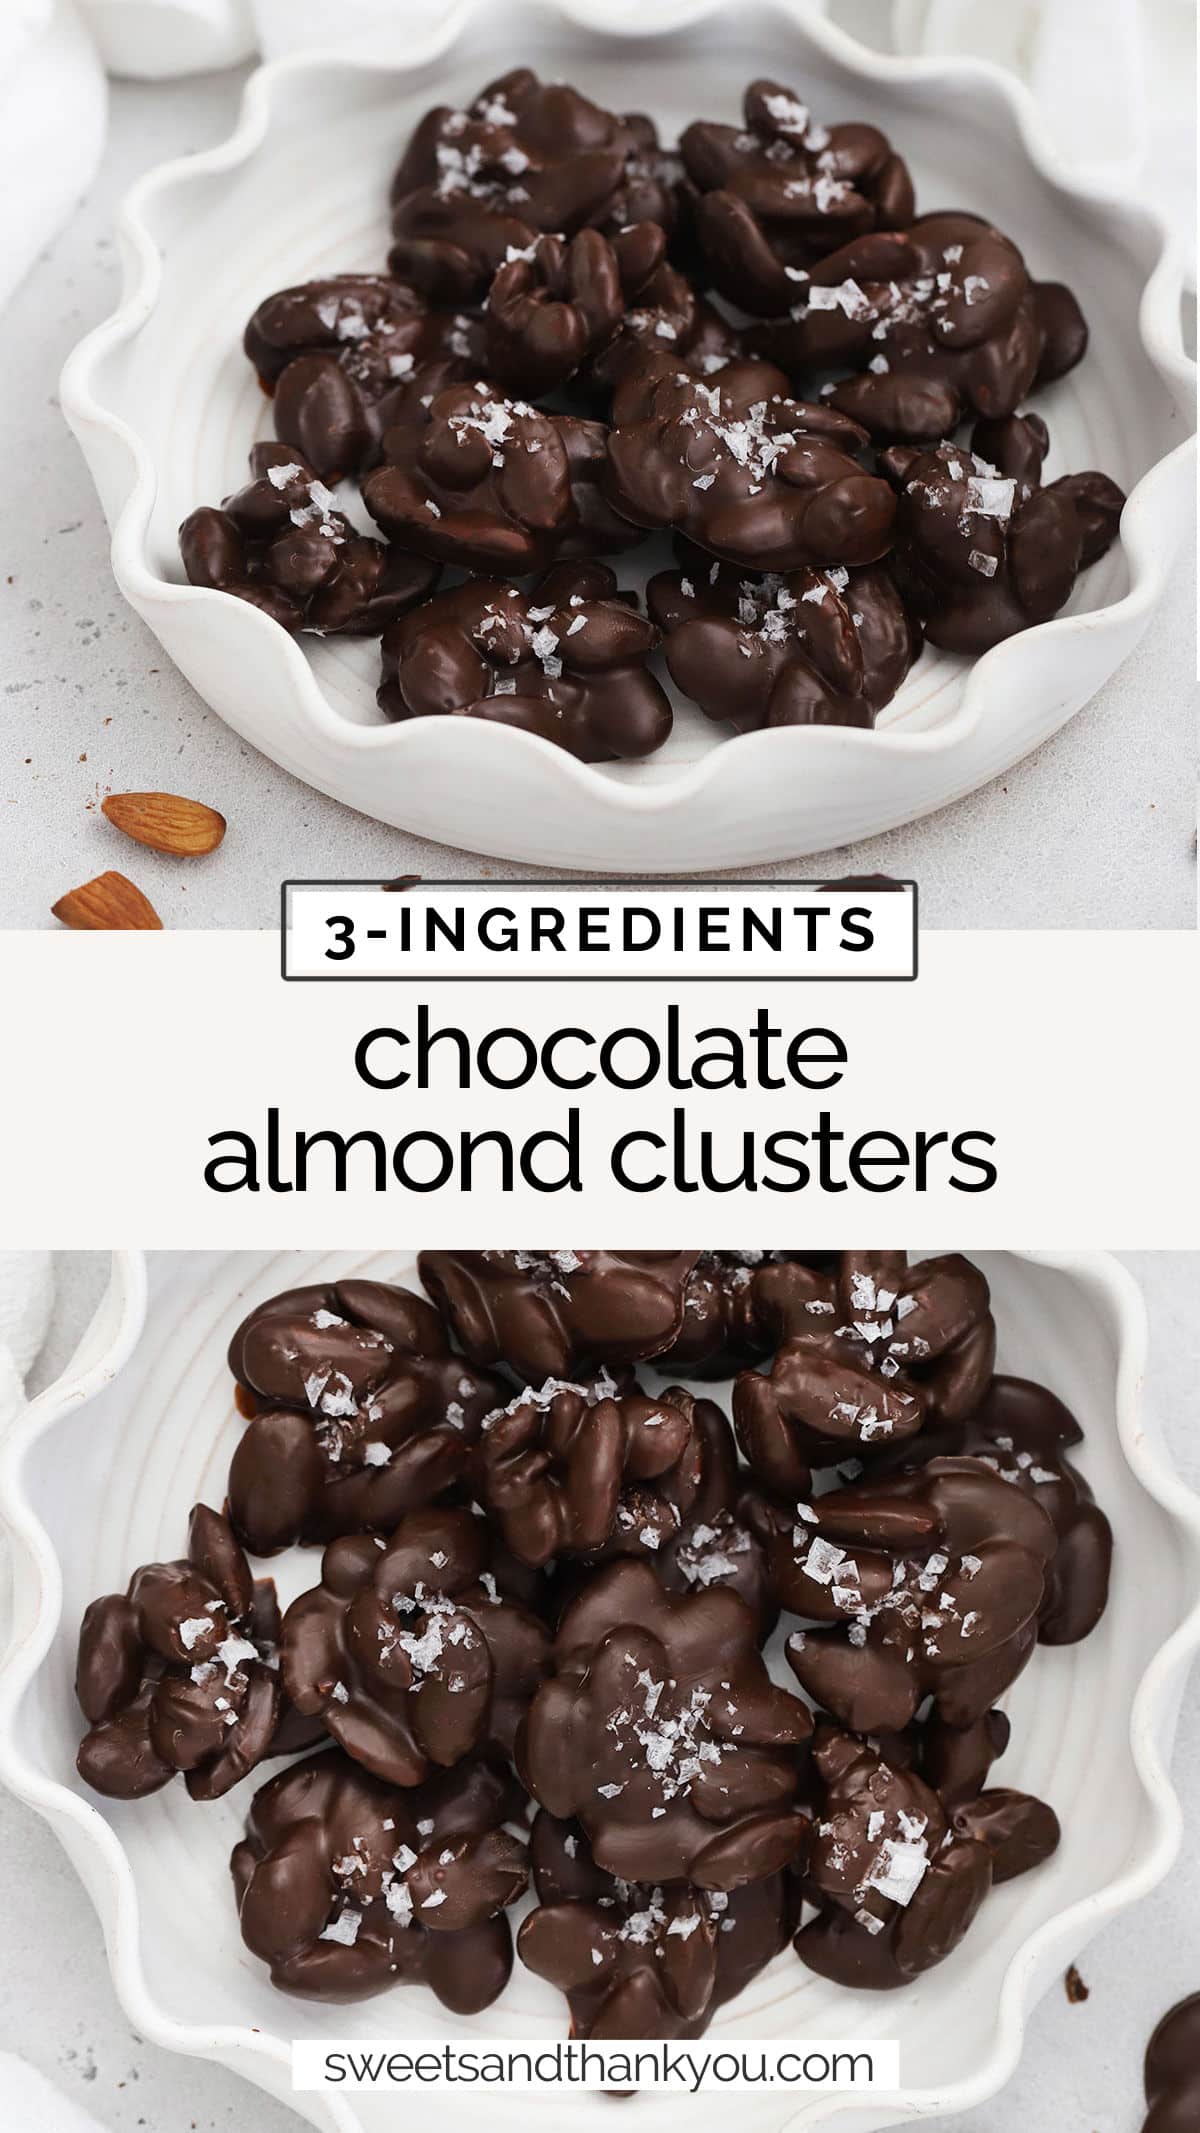 3-Ingredient Chocolate Almond Clusters have a satisfying salty-sweet crunch we can't get enough of. We love this no-bake treat! (Gluten-Free & Vegan-Friendly) // chocolate almond clusters recipe / healthy treat / healthy dessert / no-bake dessert / vegan dessert / gluten-free dessert / no-bake recipe / sweet snack / egg free dessert recipe / 